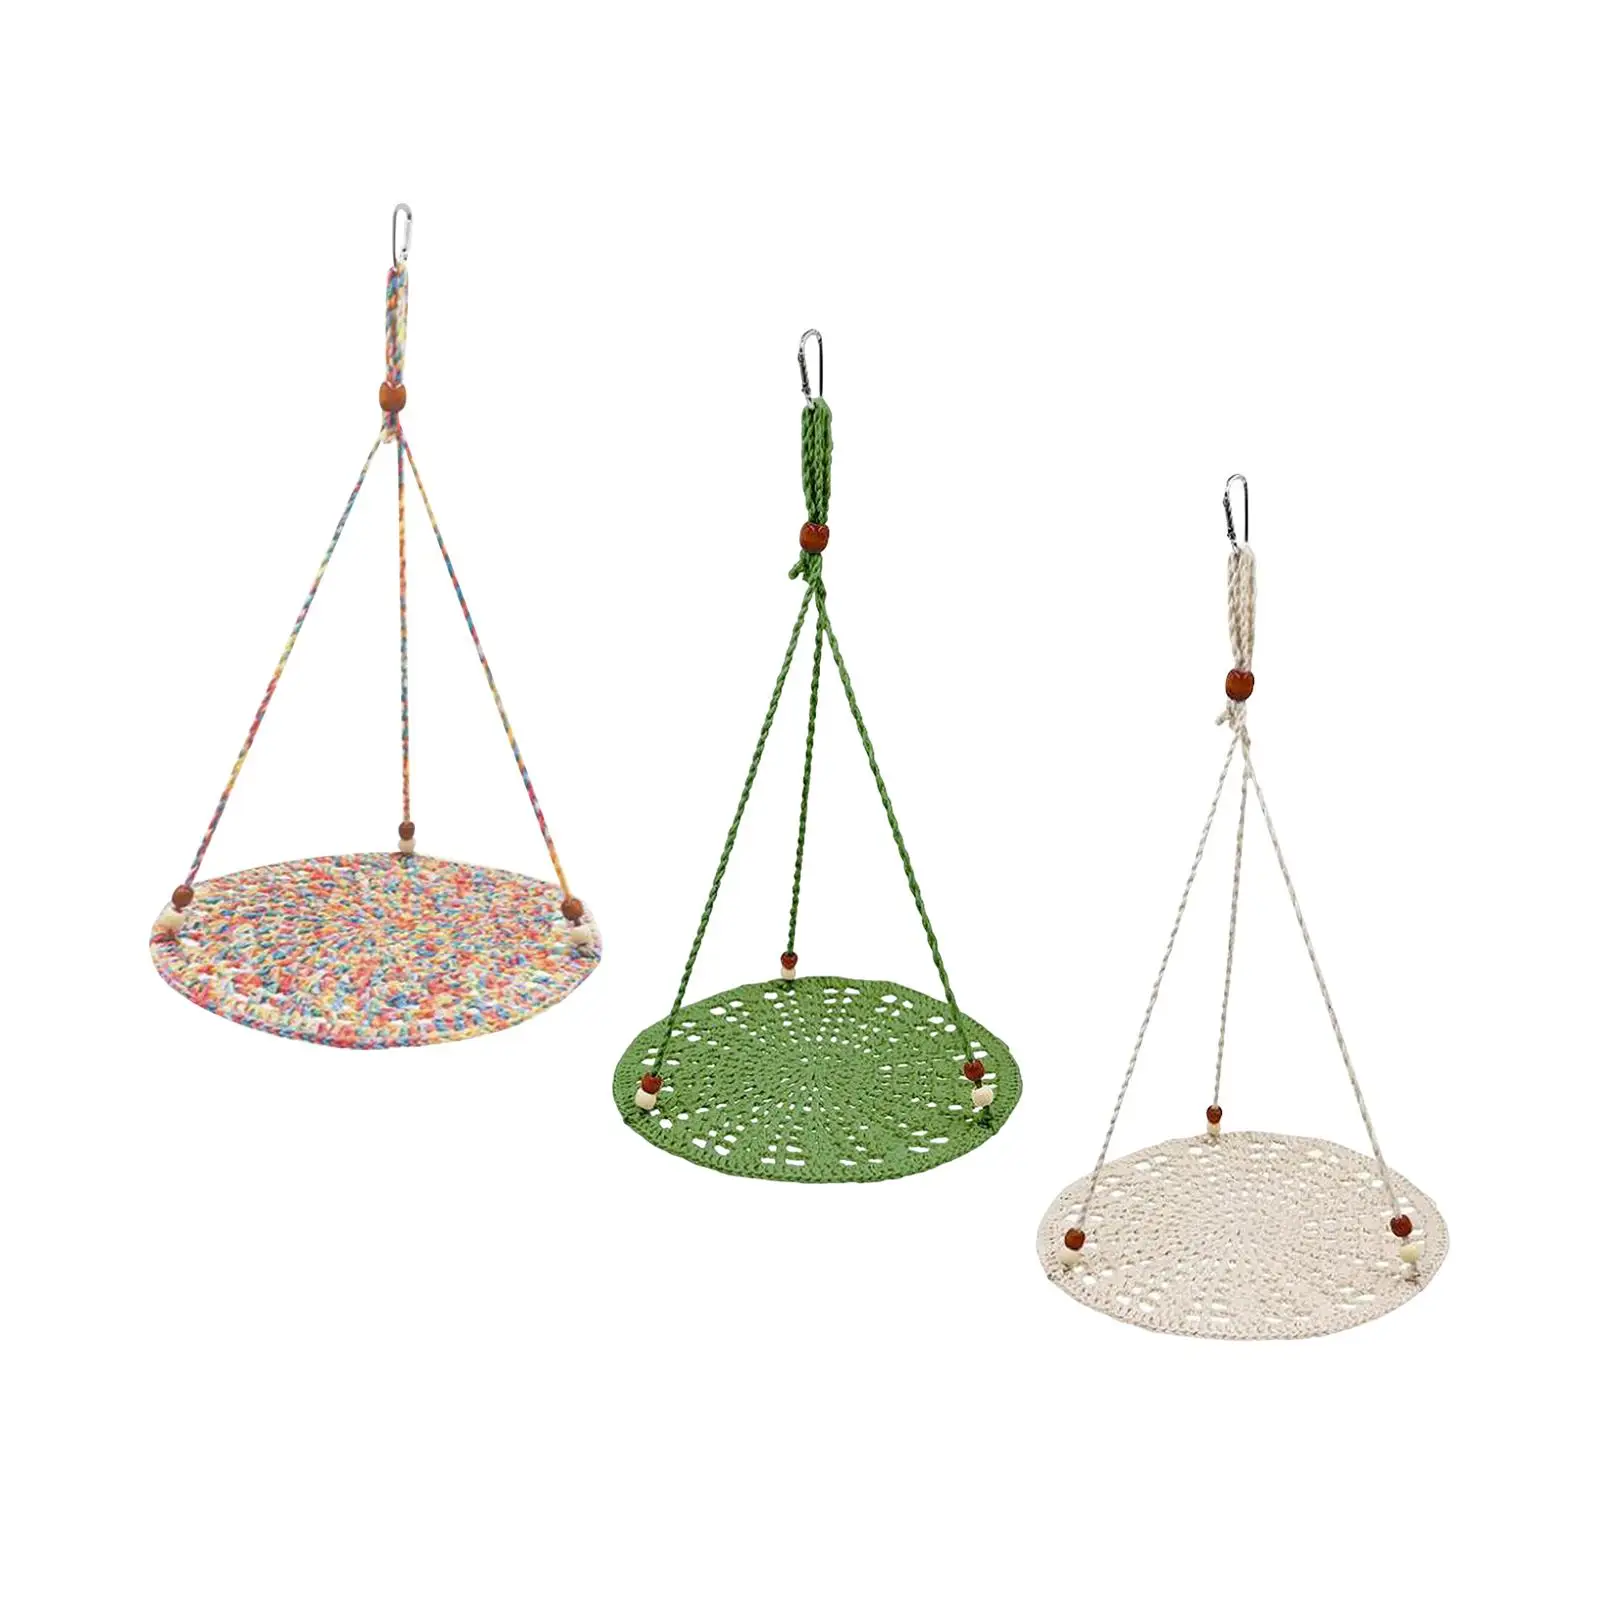 Reptile Hammock Swing Hanging Bed Summer Climbing Lounge Sleeping Bed Breathable Swing Toy for Hamster Rats Leopard Gecko Decor